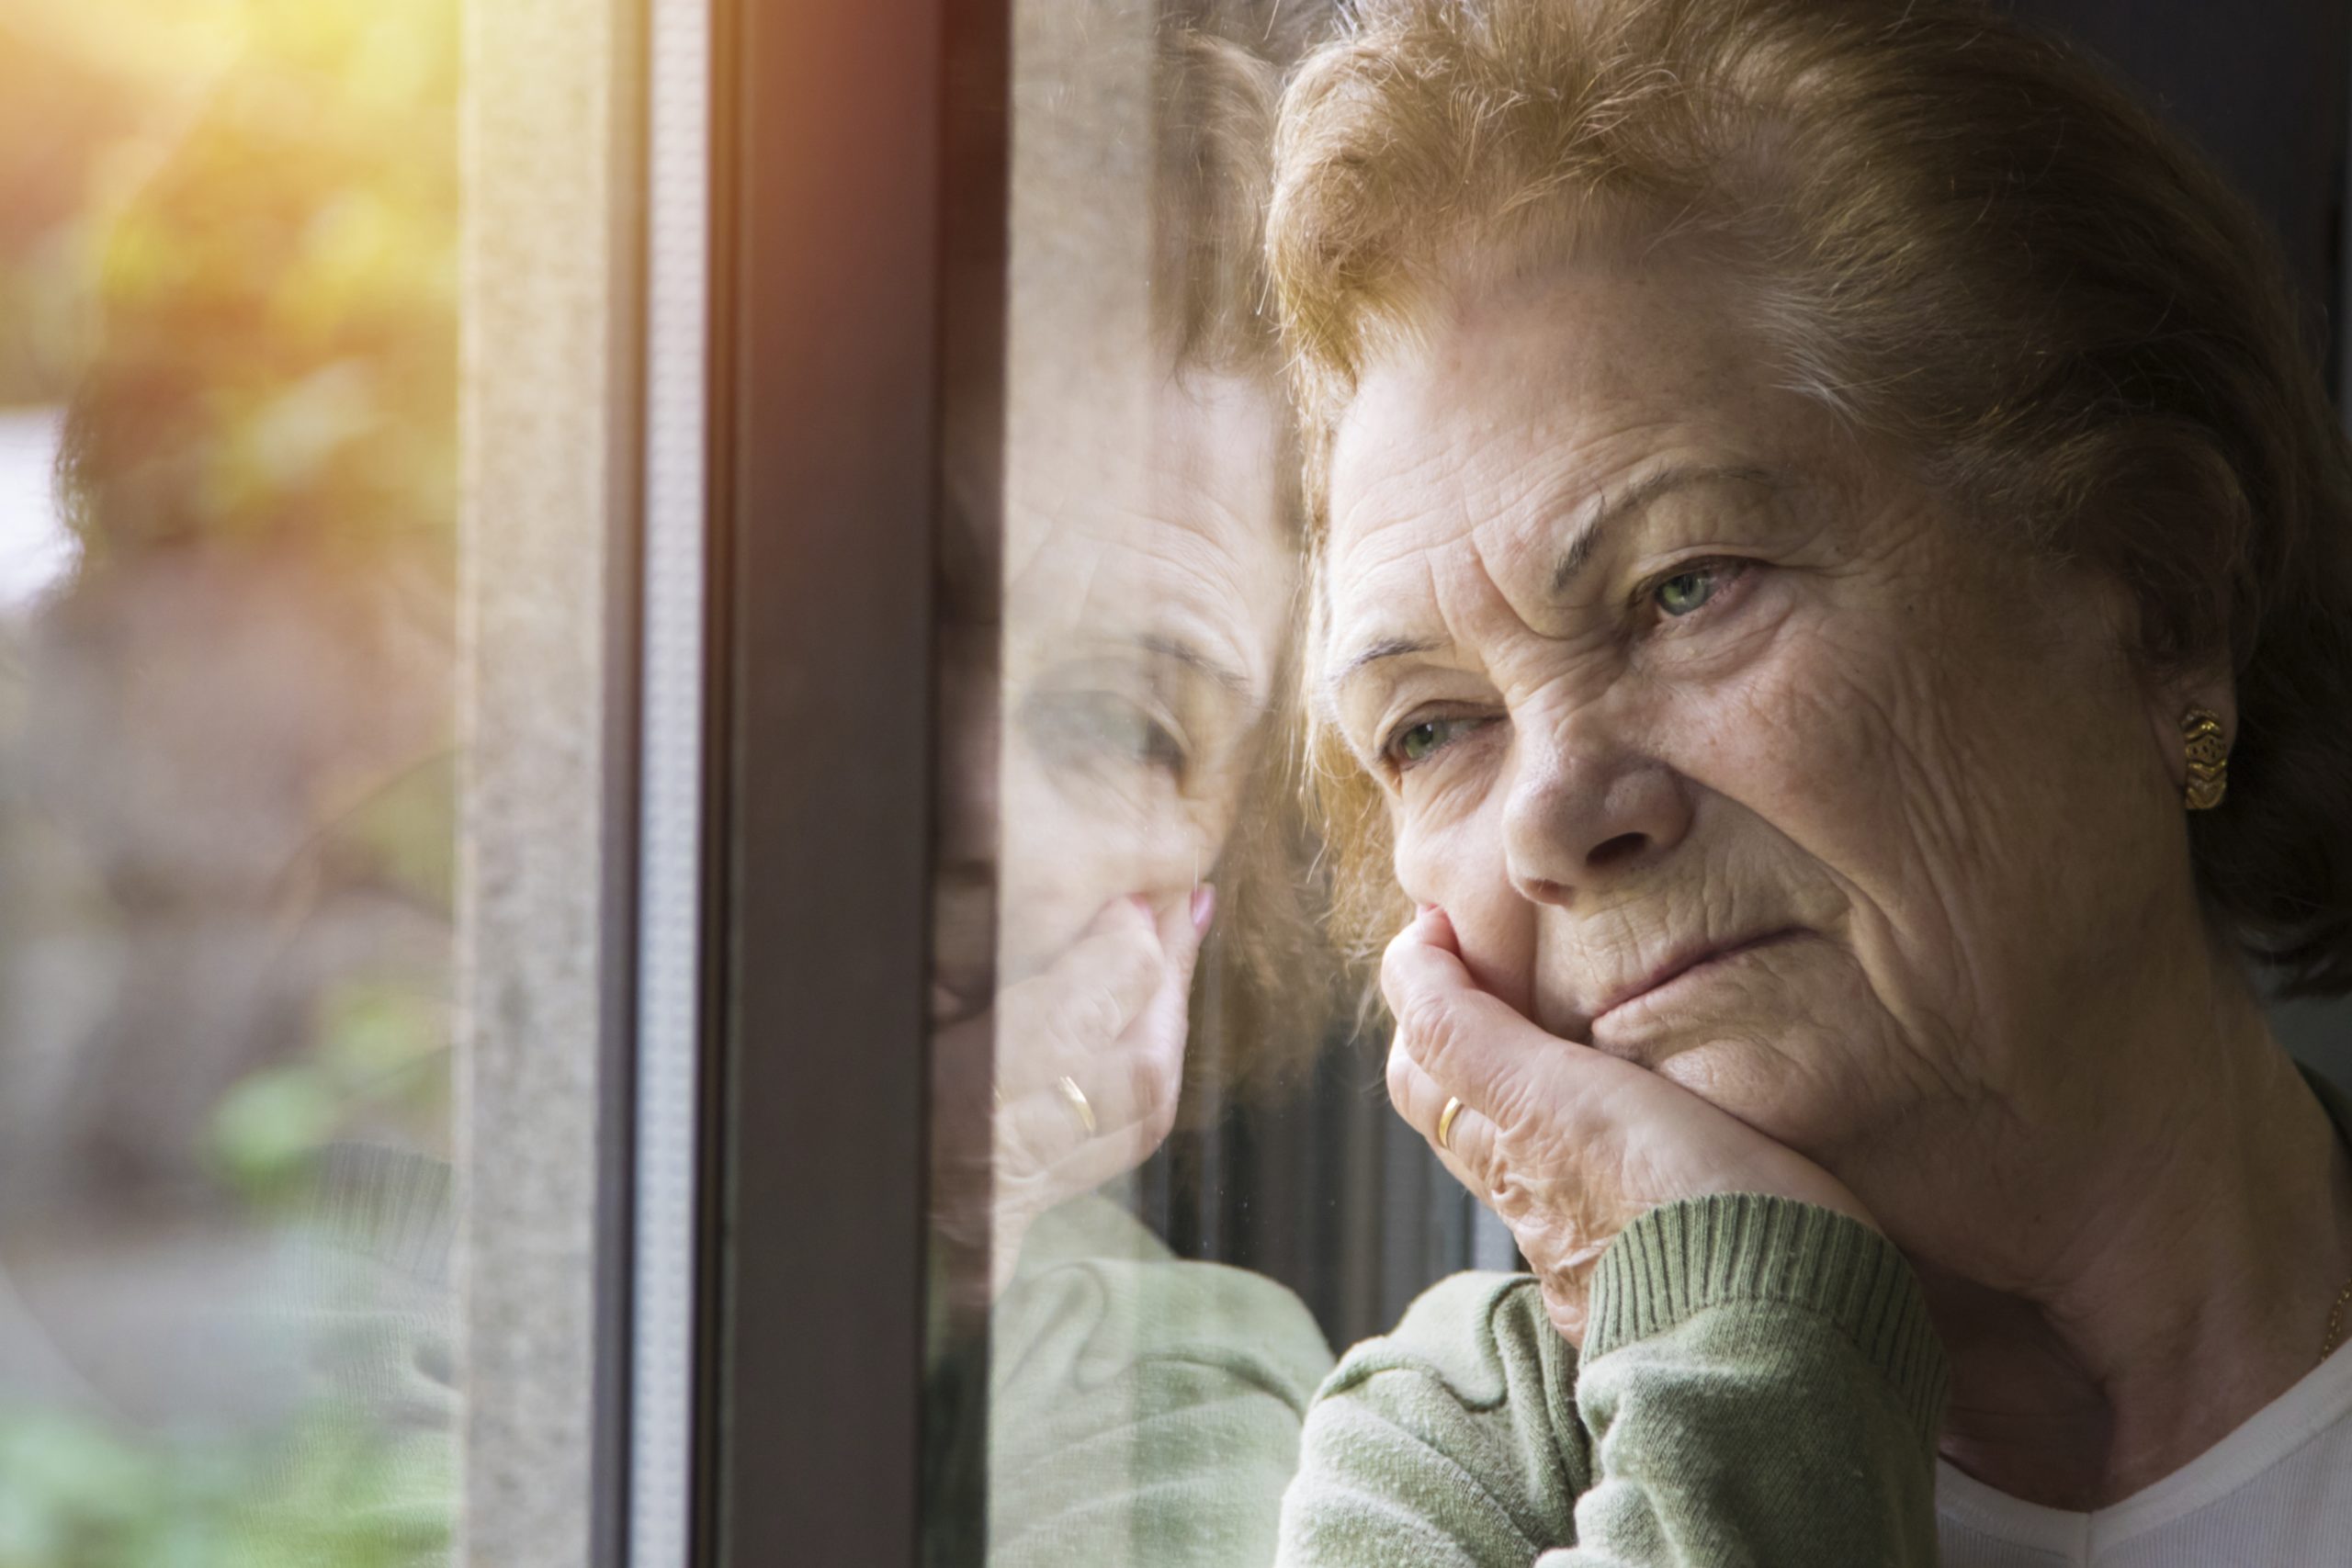 portrait of senior woman looking out the window